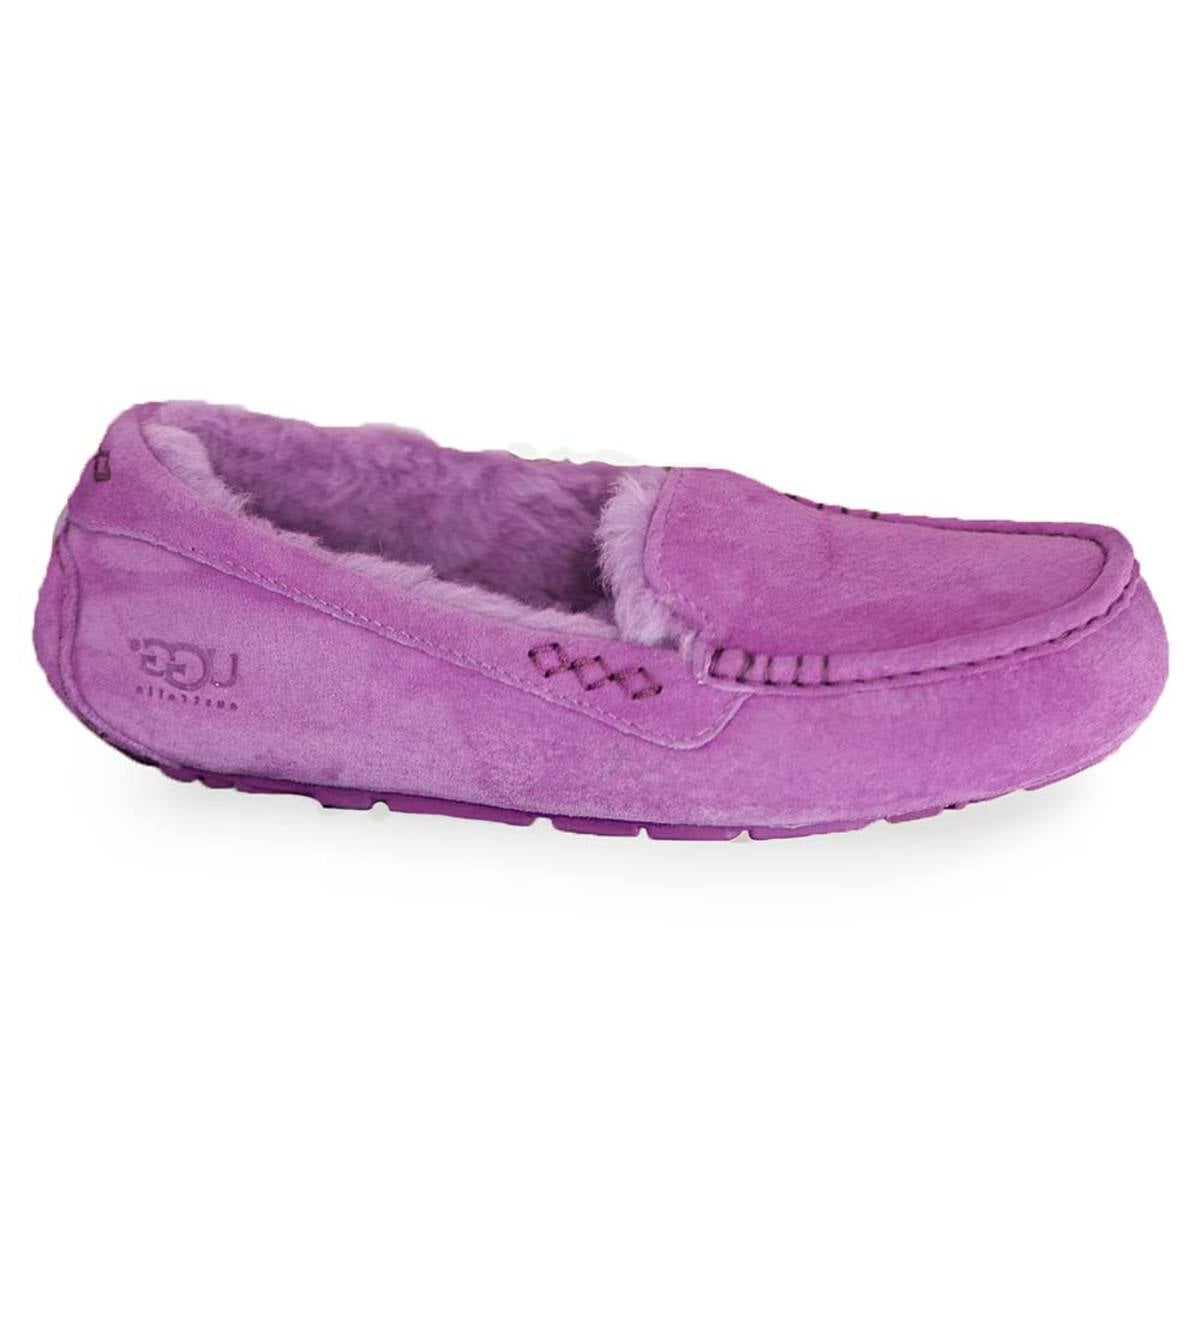 UGG Ansley Moccasin Slippers - Crazy Plum - Size 6